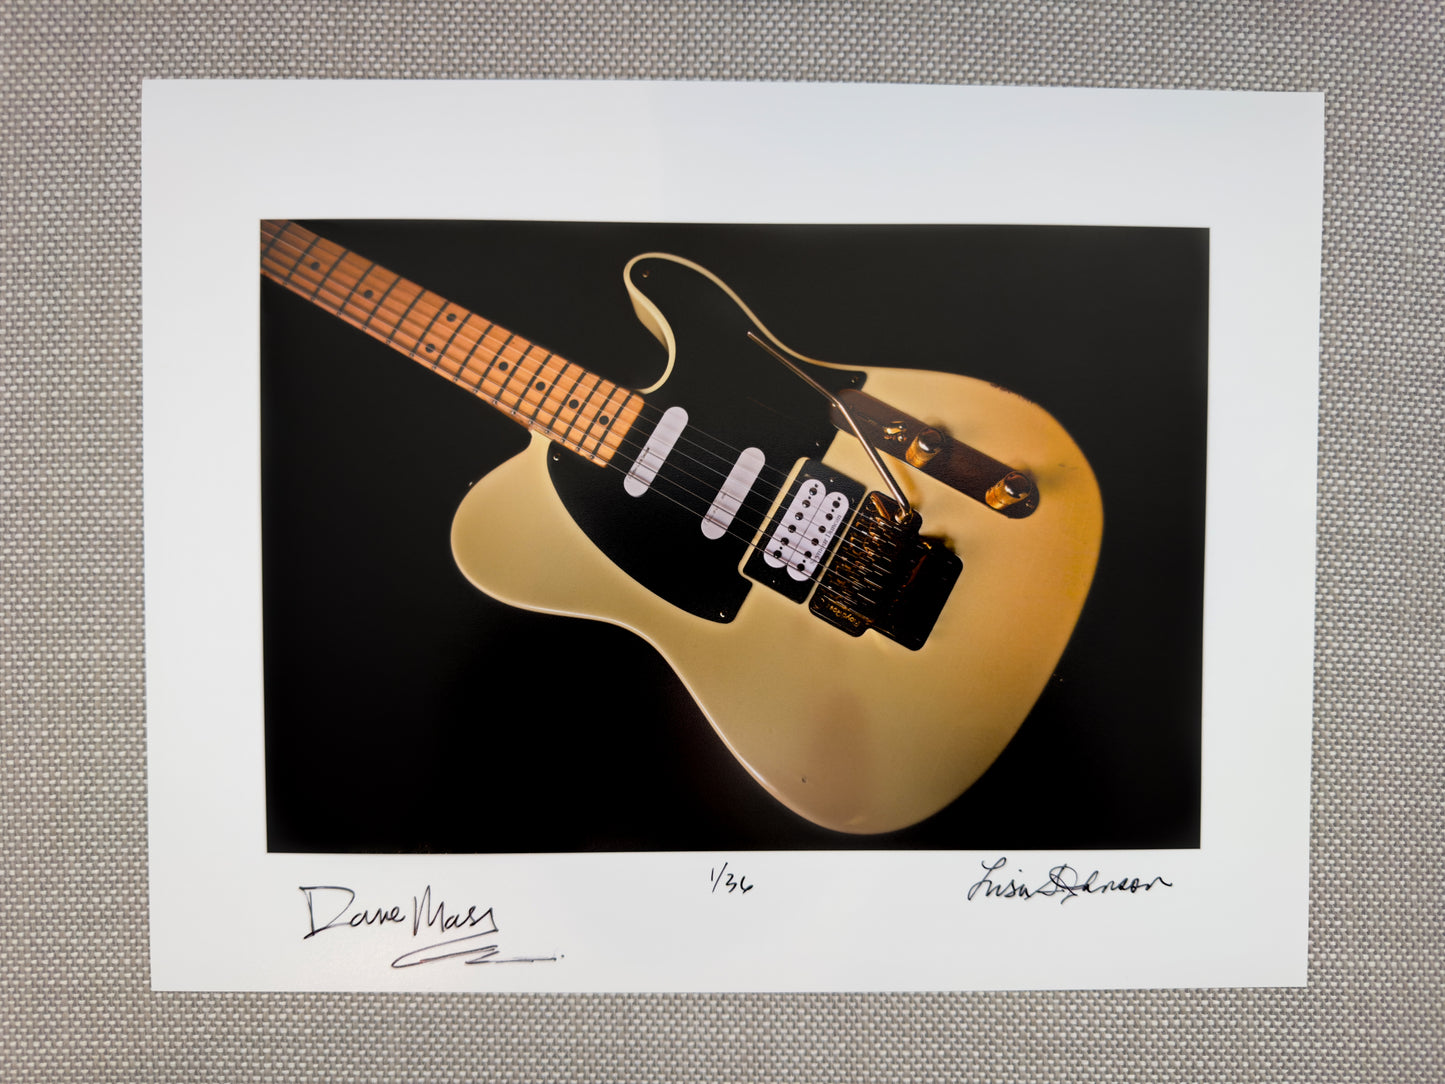 Dave Mason, Fender Telecaster - Giclee print  - Signed and numbered by Dave Mason and Lisa S. Johnson. Limited to an Edition of 36.